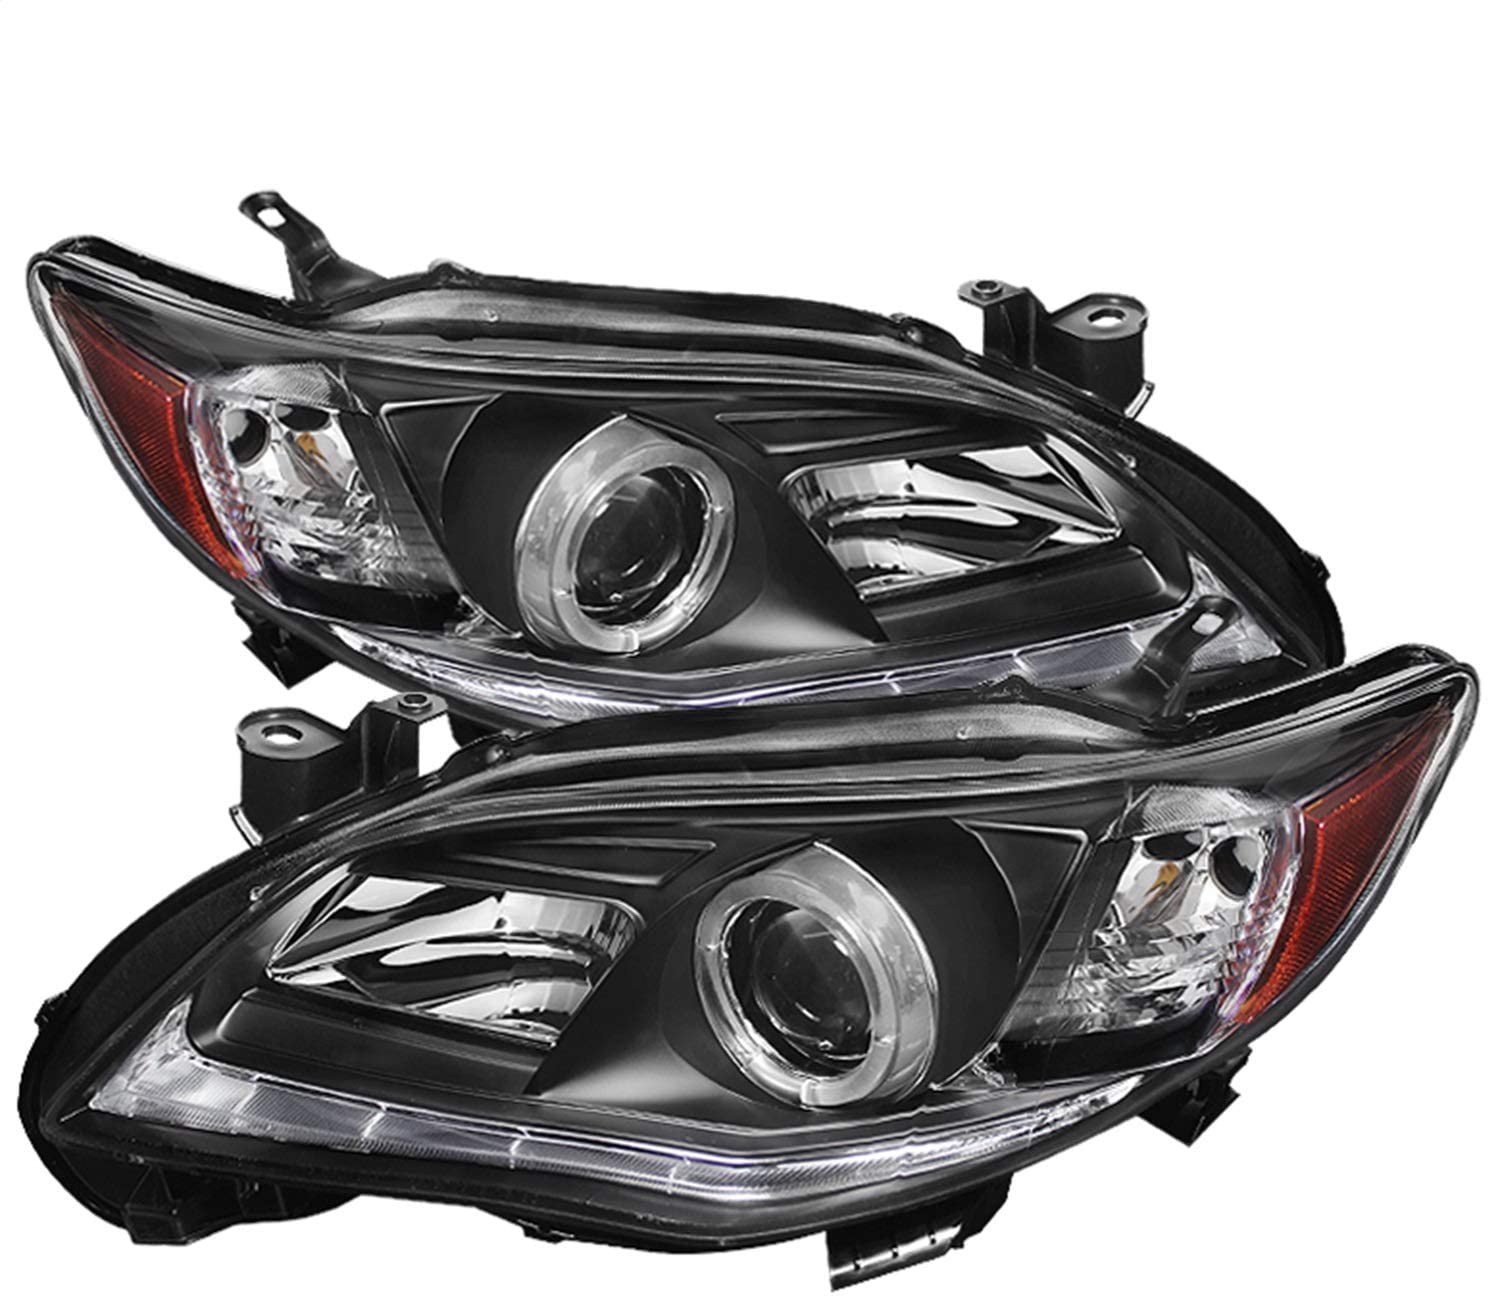 Spyder Auto 5074263 Projector Style Headlights Black/Clear